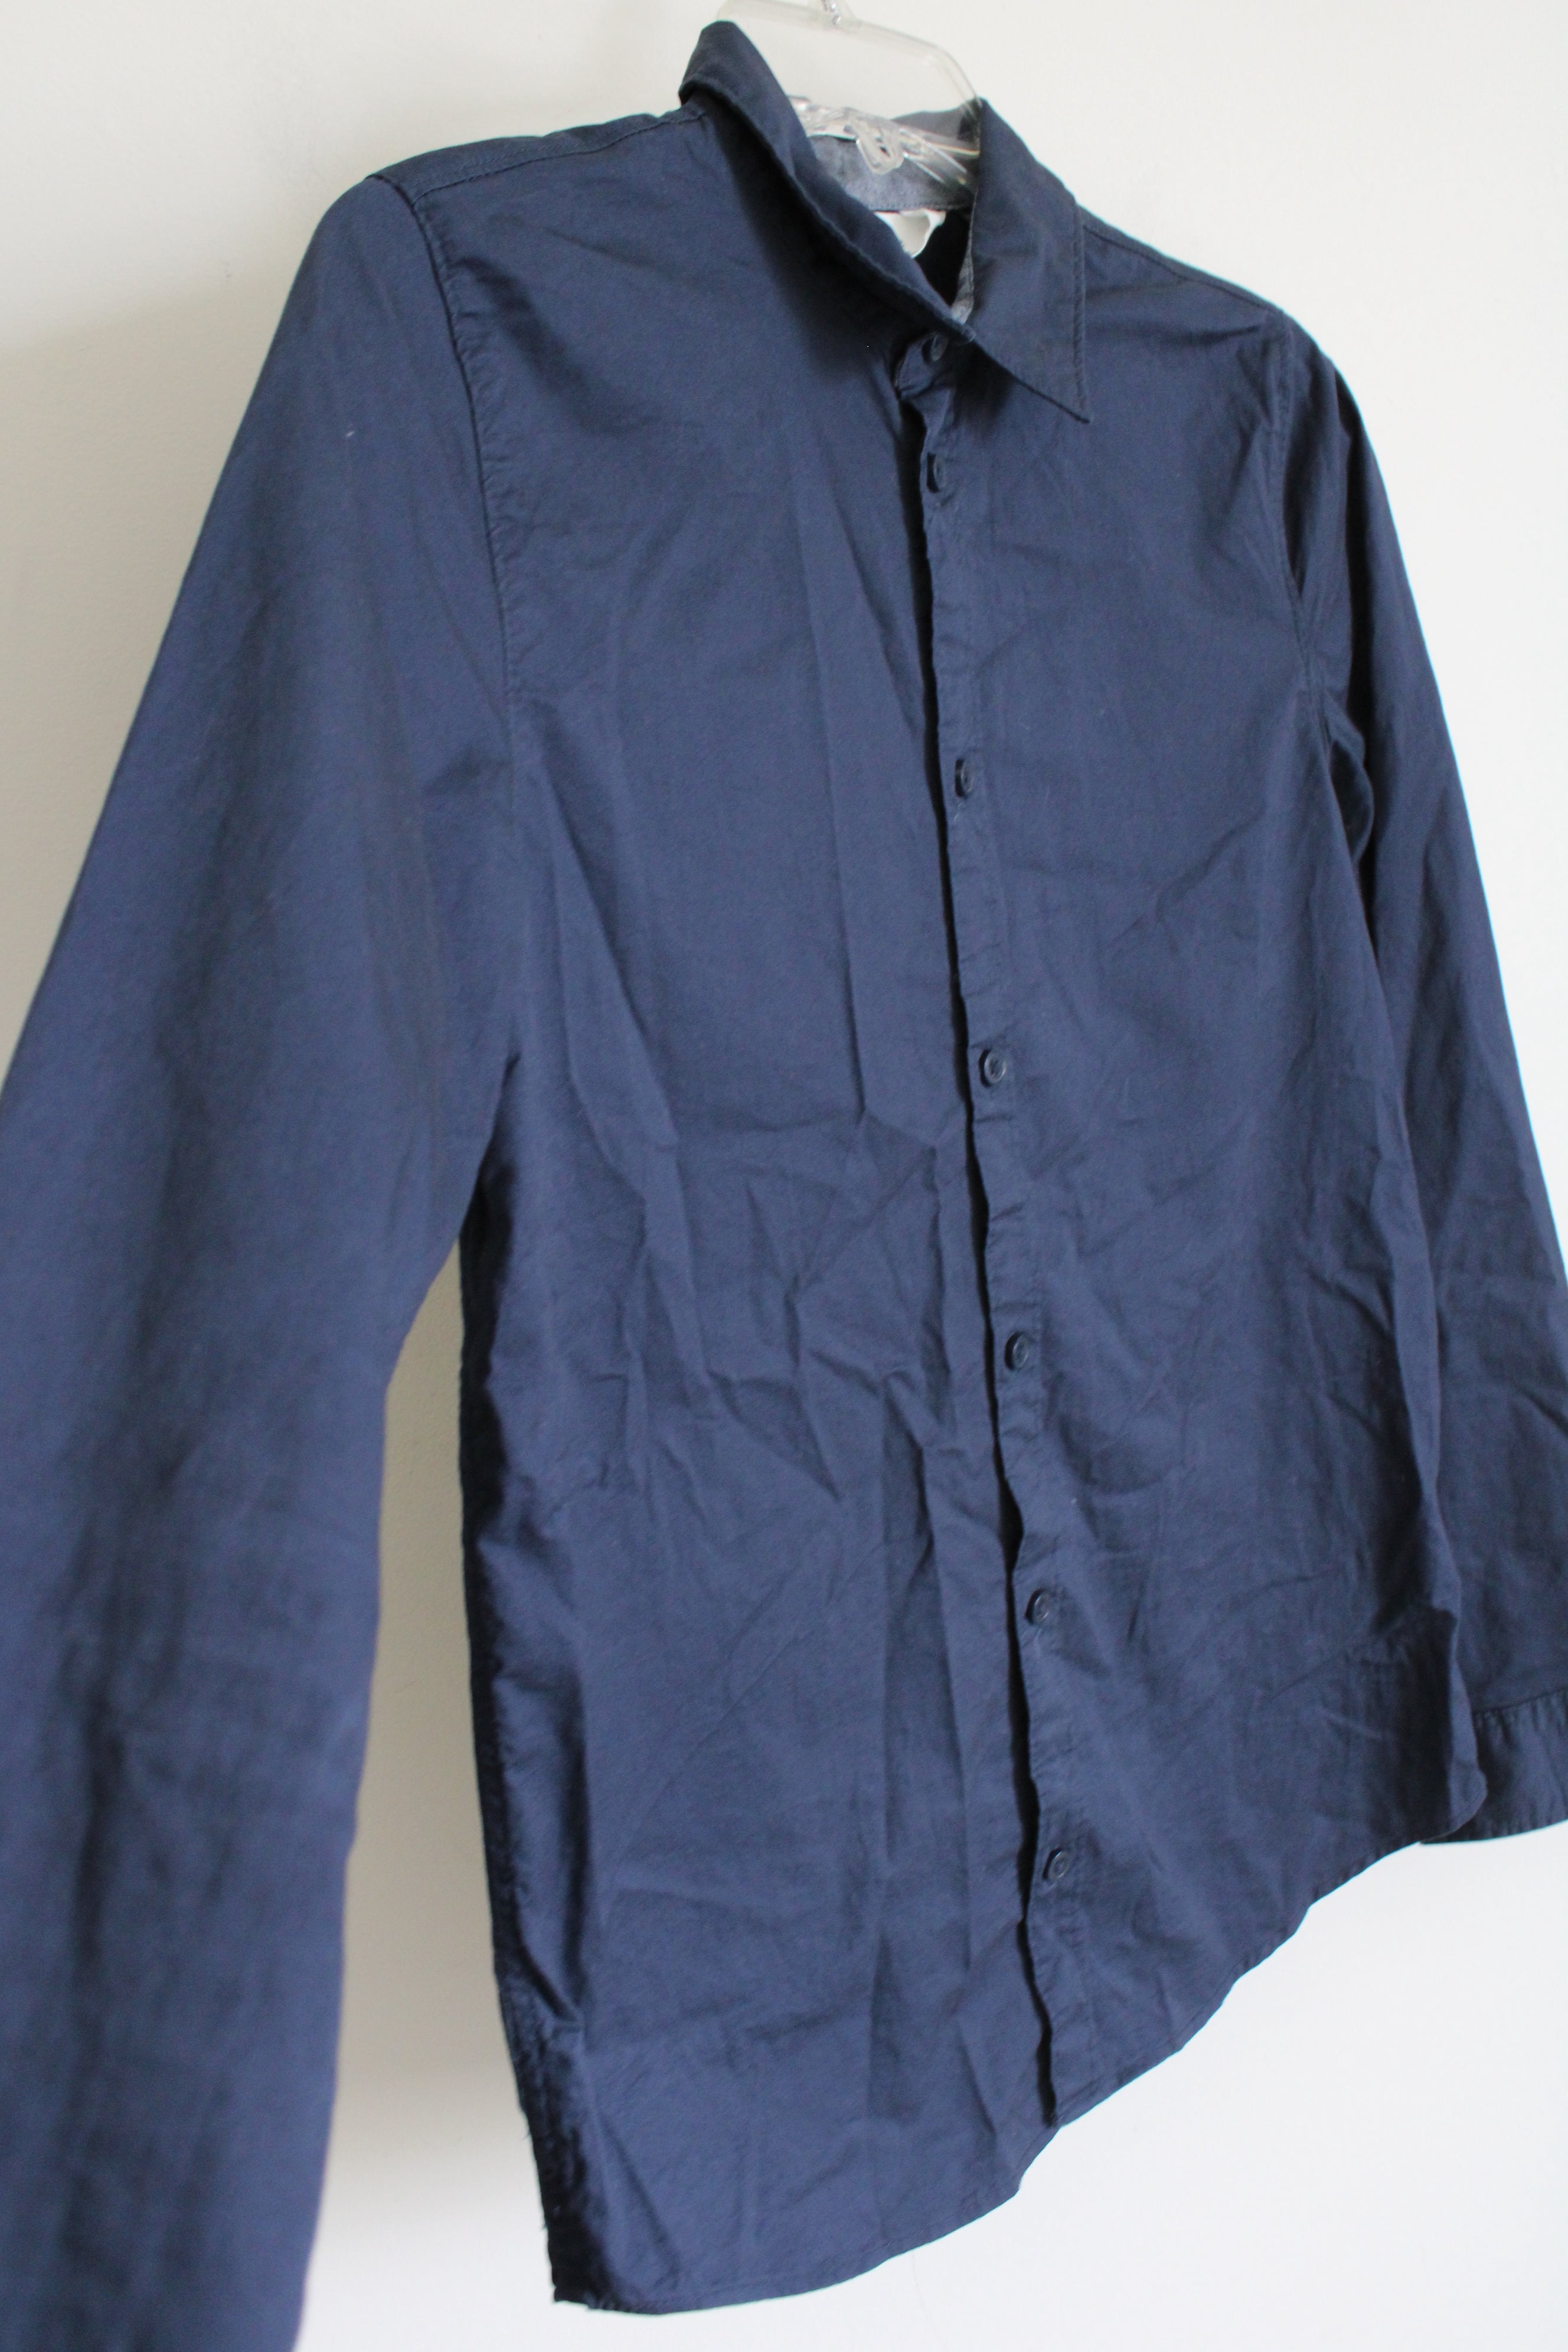 H&M Navy Long Sleeved Button Down | Youth 16